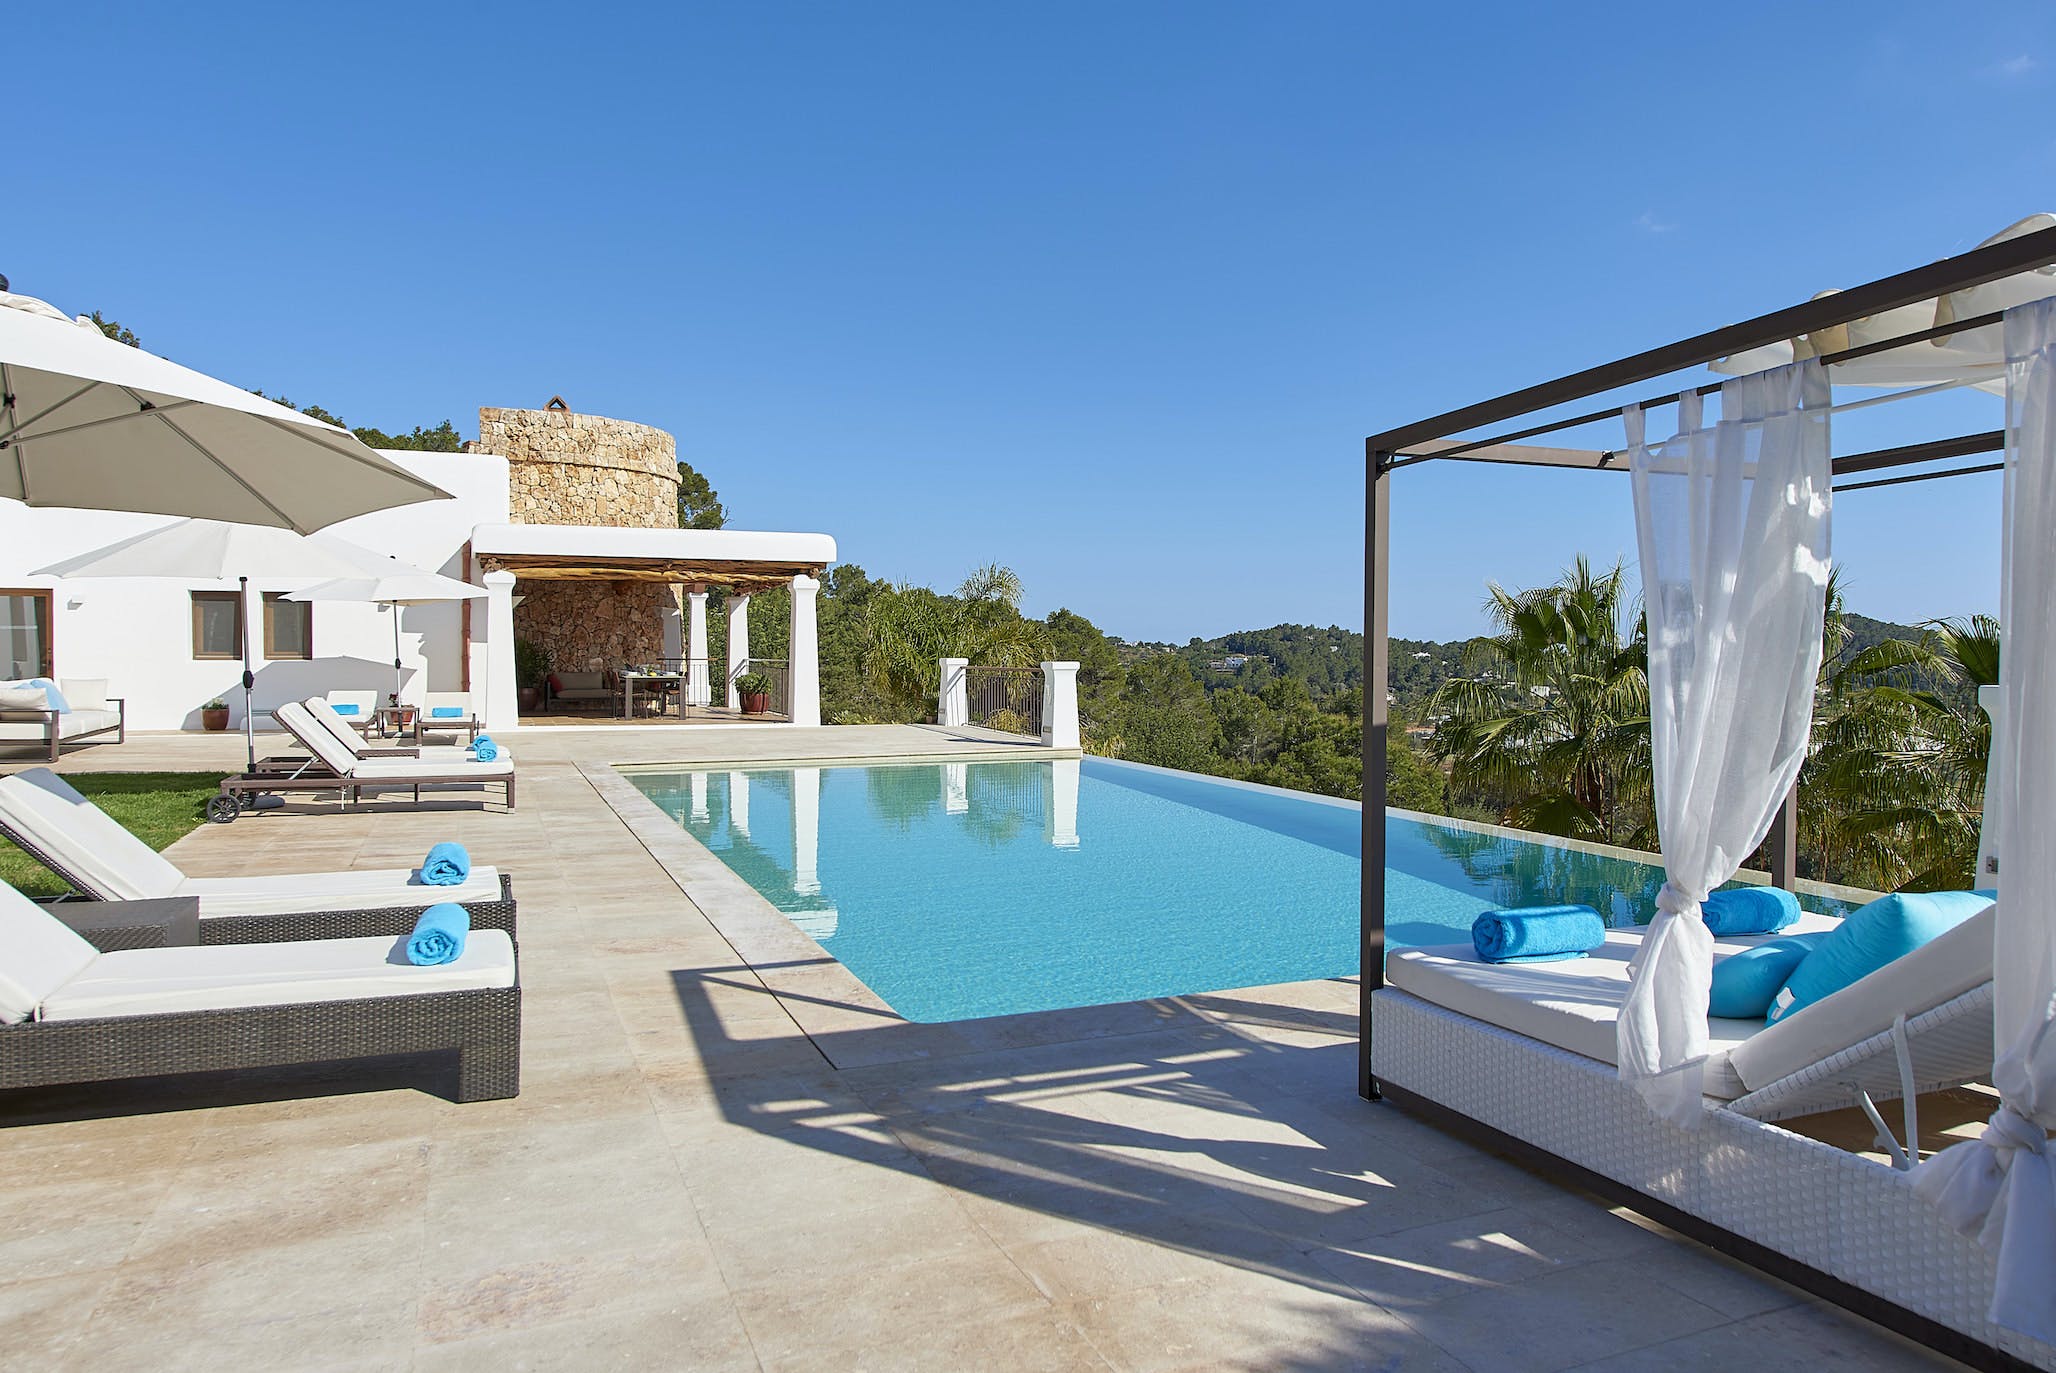 You are currently viewing Cana Delfina – ‘Located high on a hillside overlooking San Carlos, Santa Eulalia and the sparkling Mediterranean beyond.’